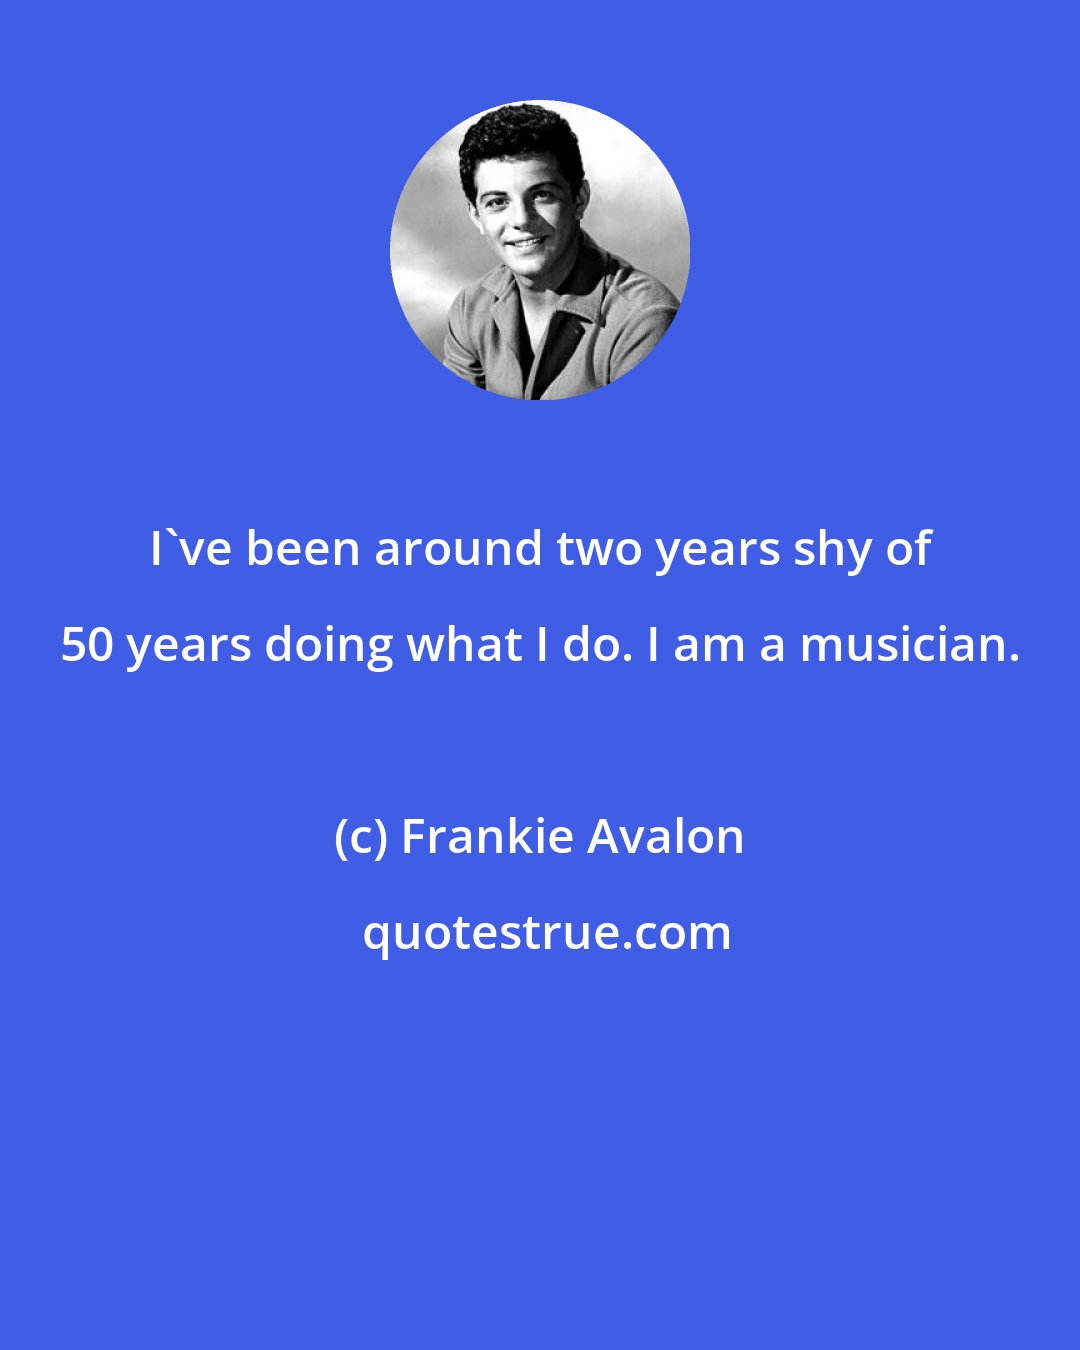 Frankie Avalon: I've been around two years shy of 50 years doing what I do. I am a musician.